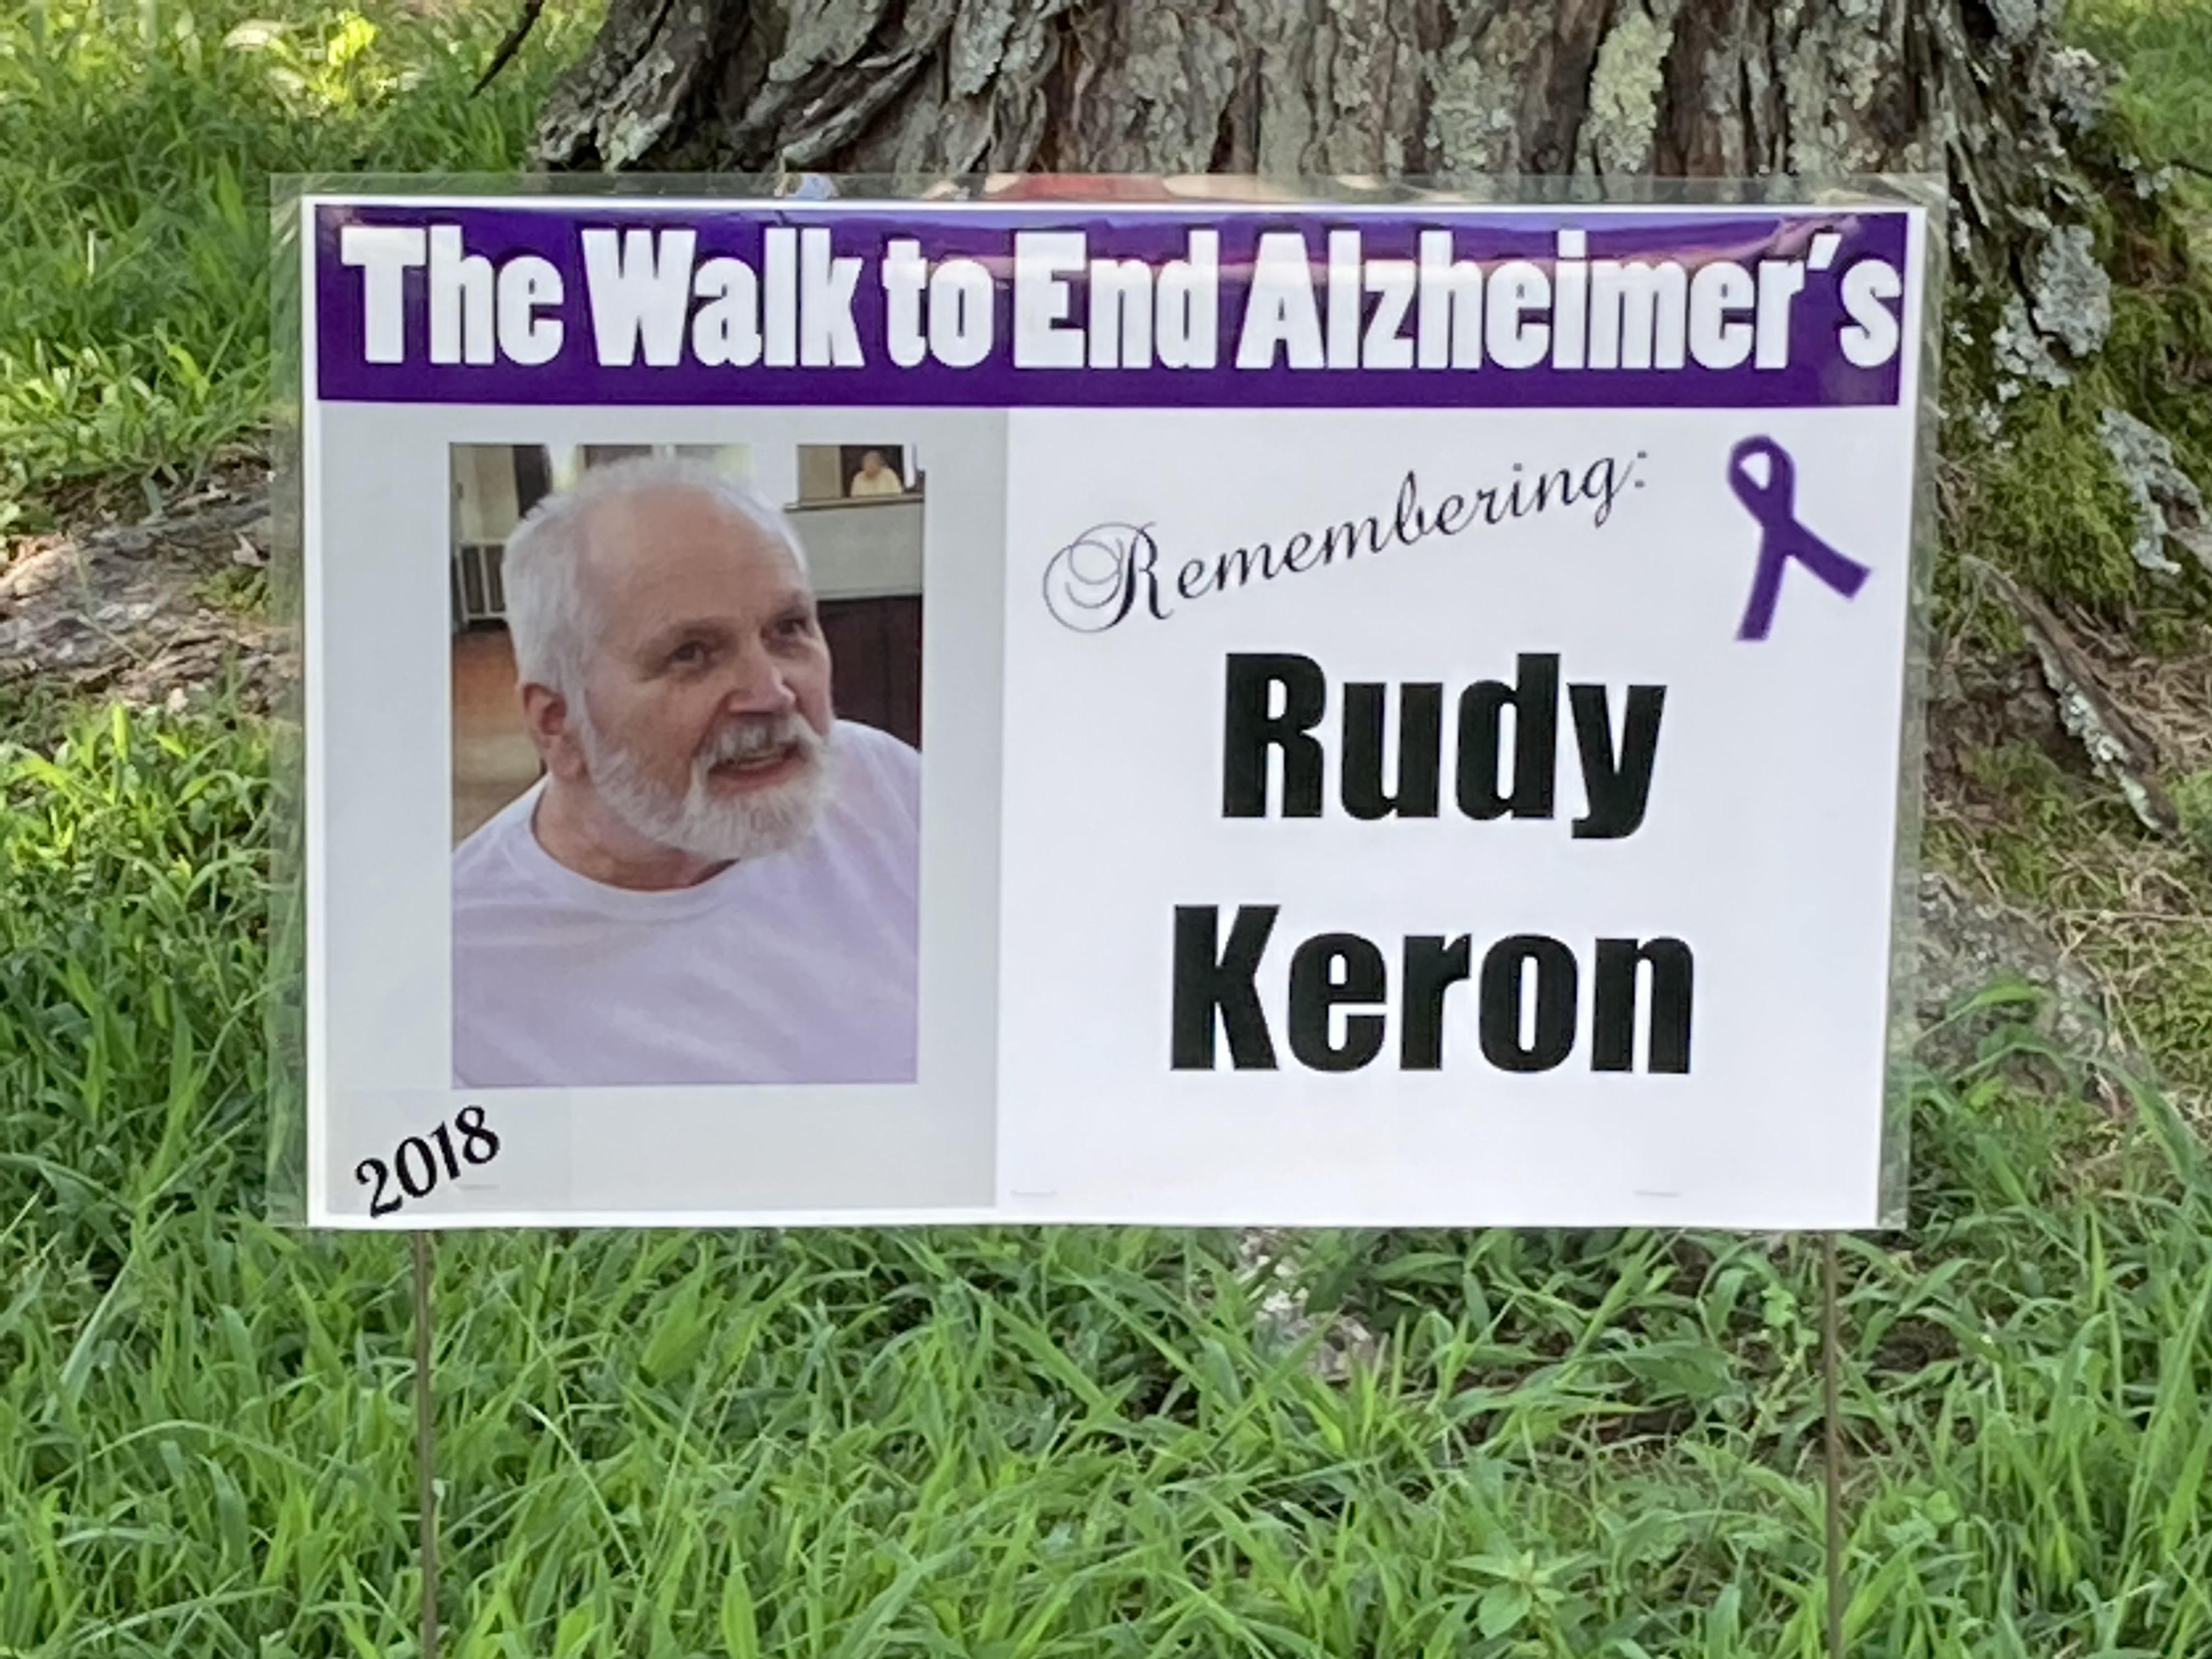 the walk to end alzheimer's